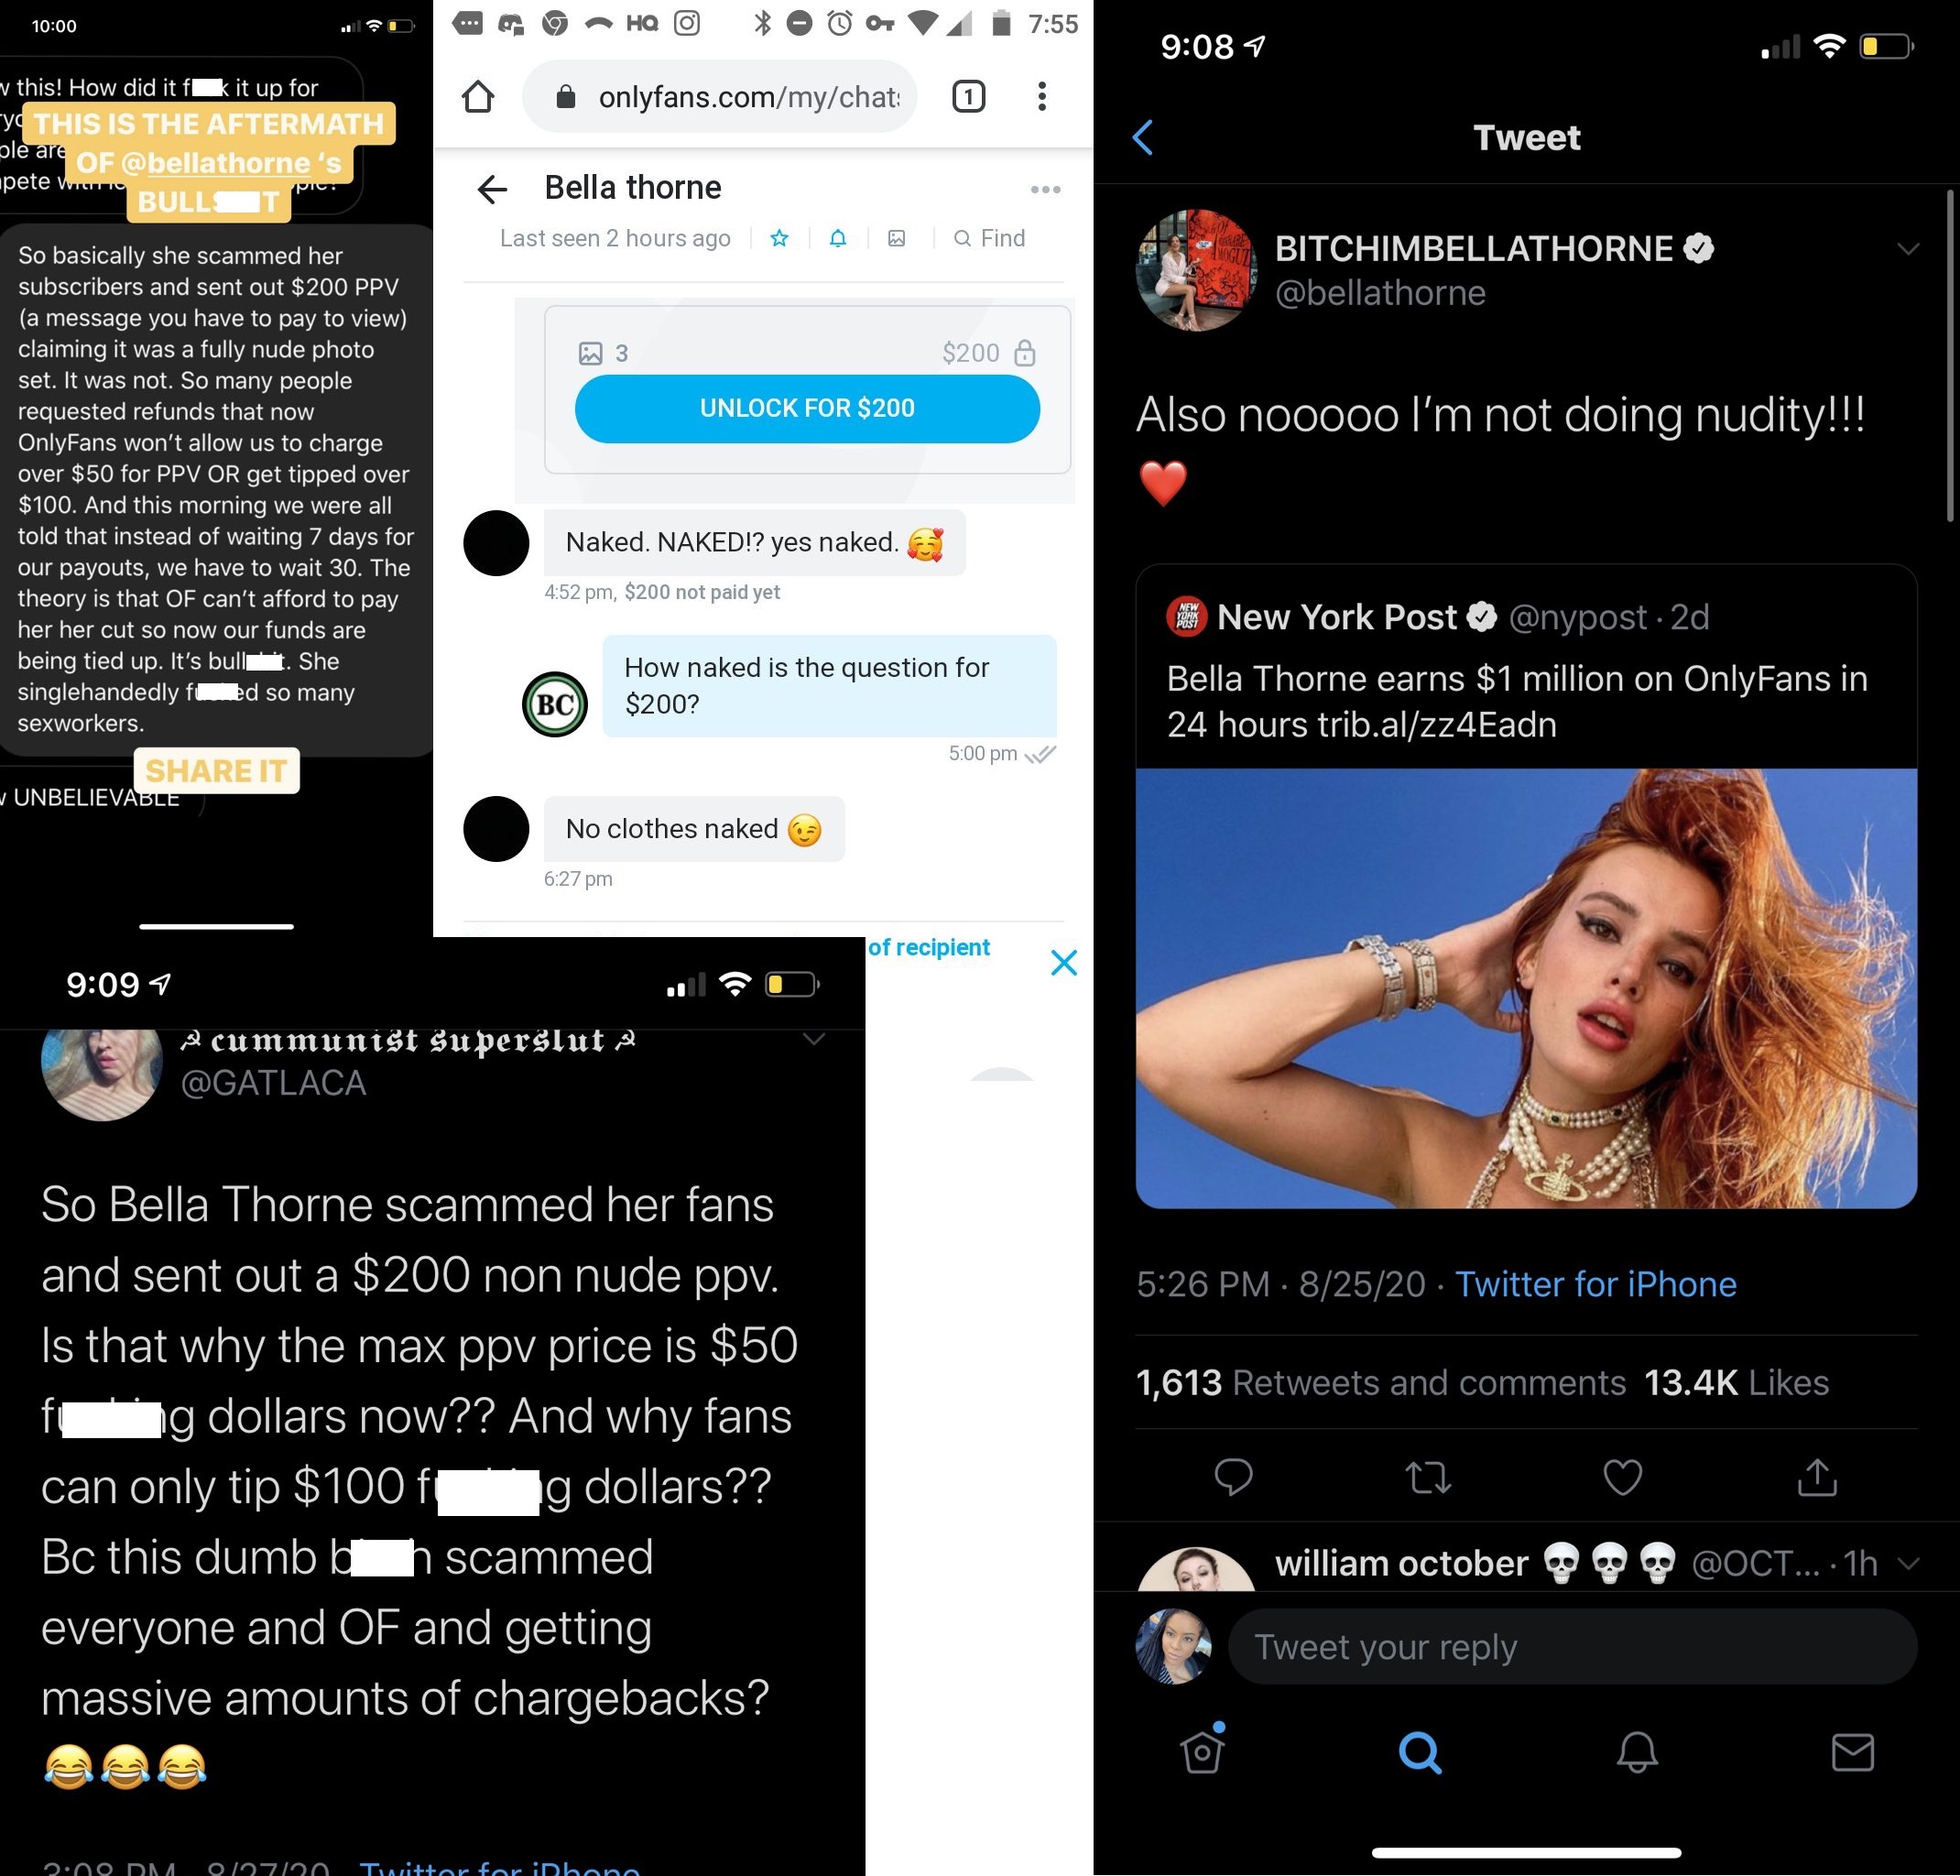 Bella Thorne recently joined OnlyFans and made $1 million, in just one day. Unfortunately, her charging $200, for a nude photo set, which was only partially nude, led to people demanding refunds. This has had a negative impact on many of the other OnlyFans creators, leading to them calling her out, on Twitter, as $50 has become the max amount creators can charge for photo sets, and $100 has become the maximum tip amount.